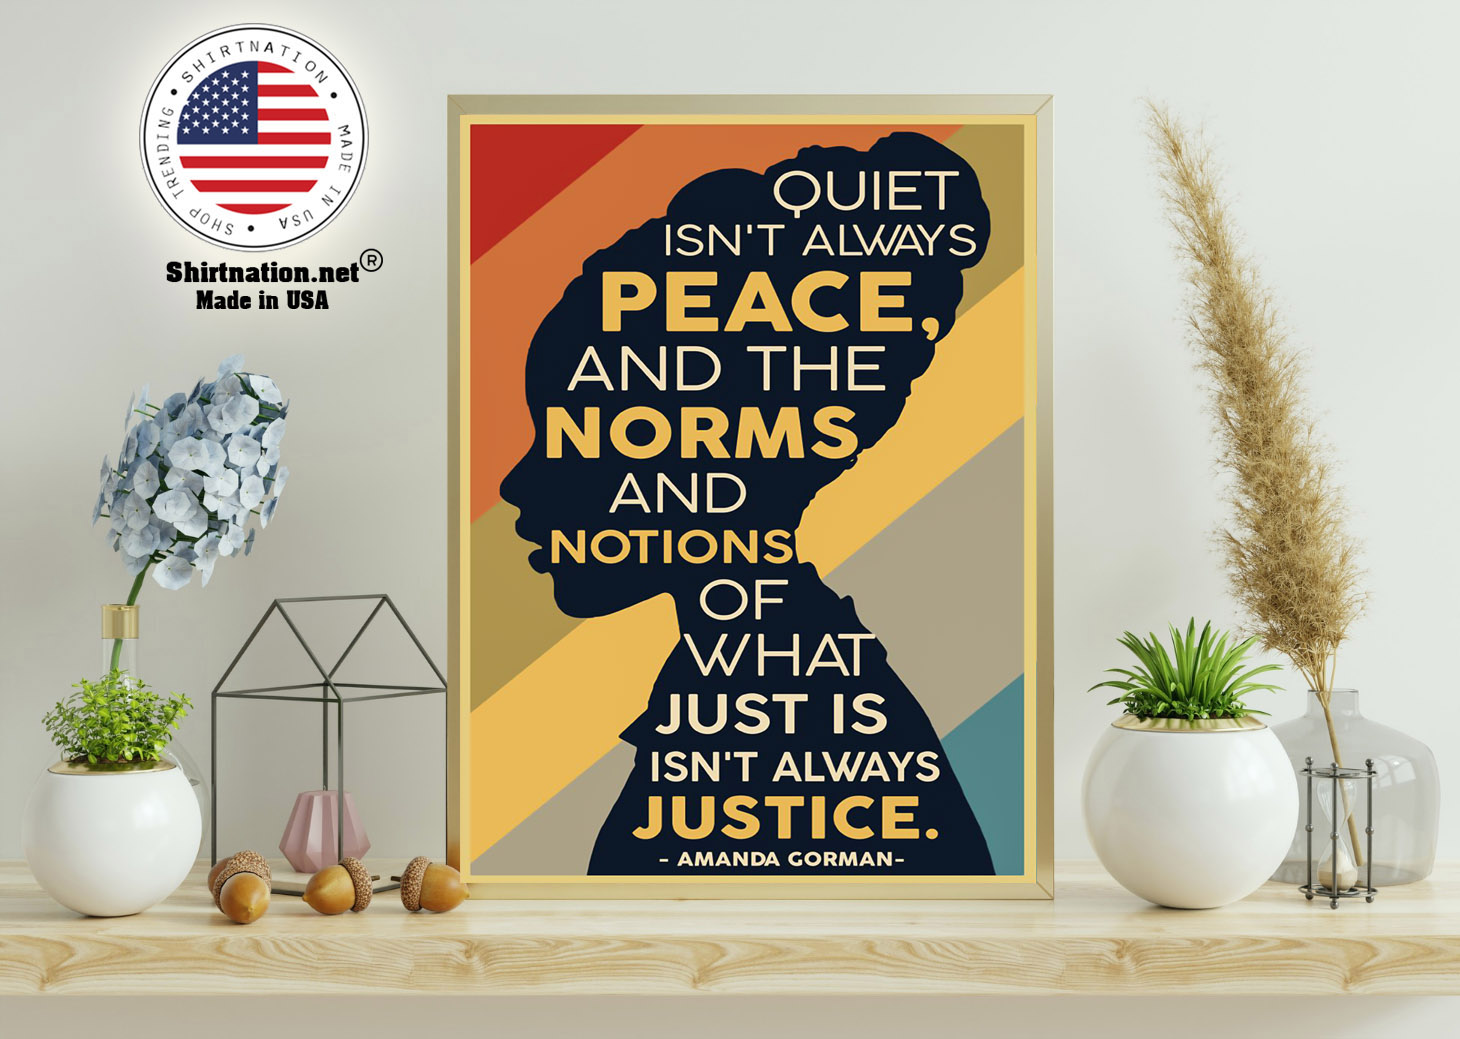 Amanda Gorman Quiet isnt always peace and the norm and notions of what just is isnt always justice poster 15